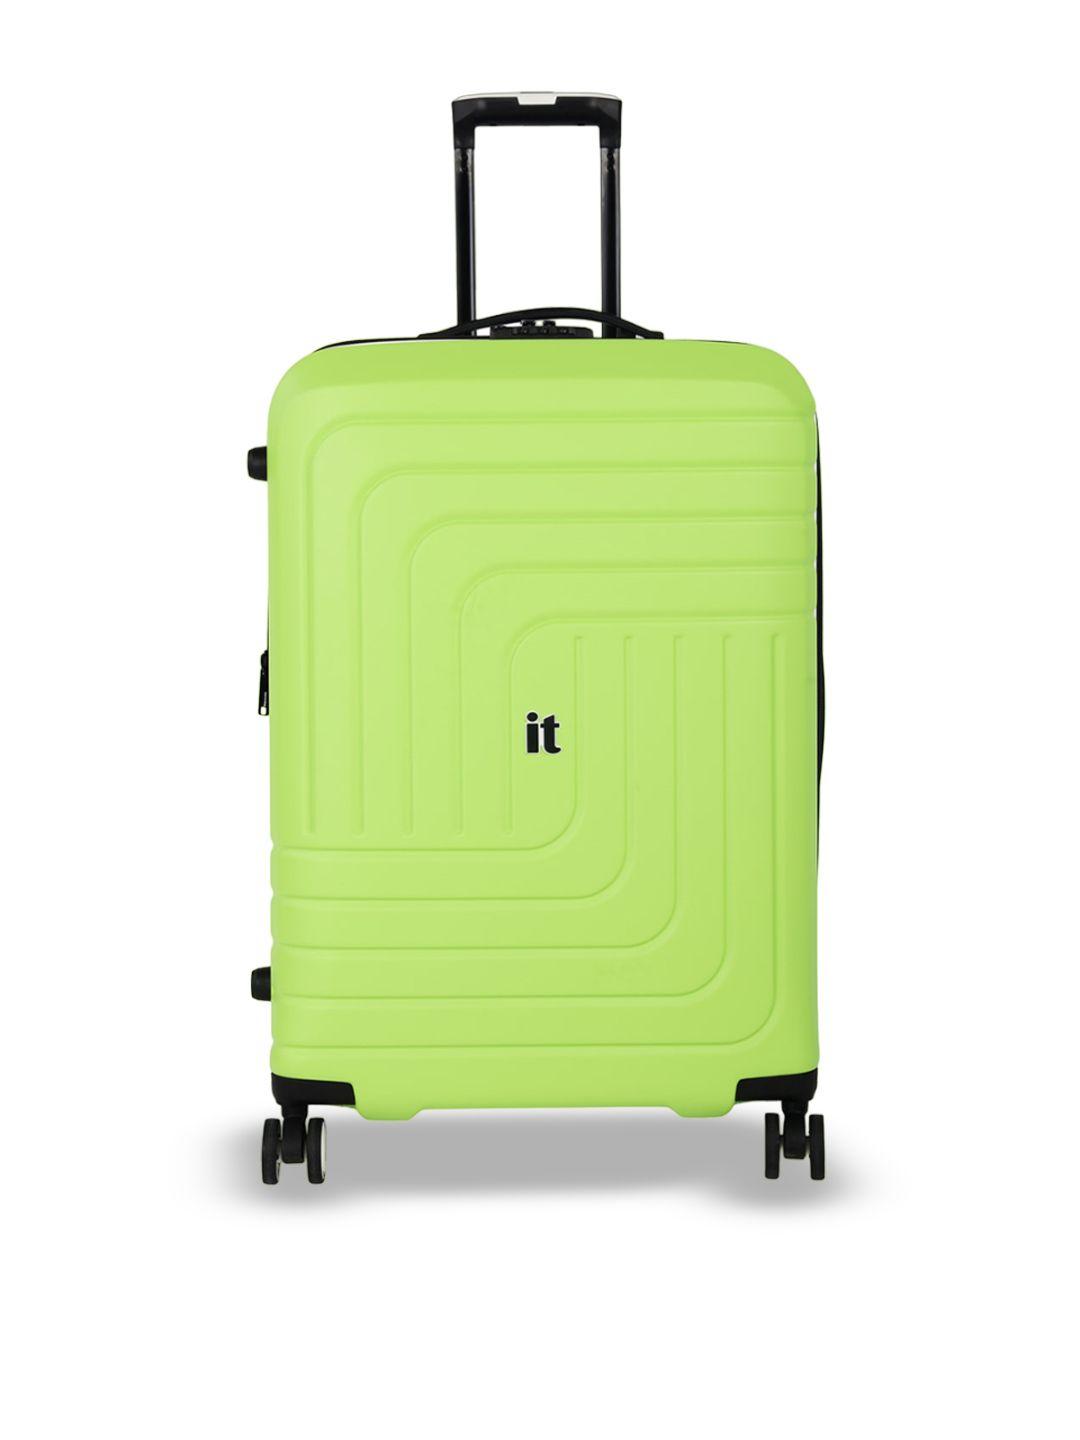 it luggage convolved textured 24 inches hard-sided 360-degree rotation trolley bag